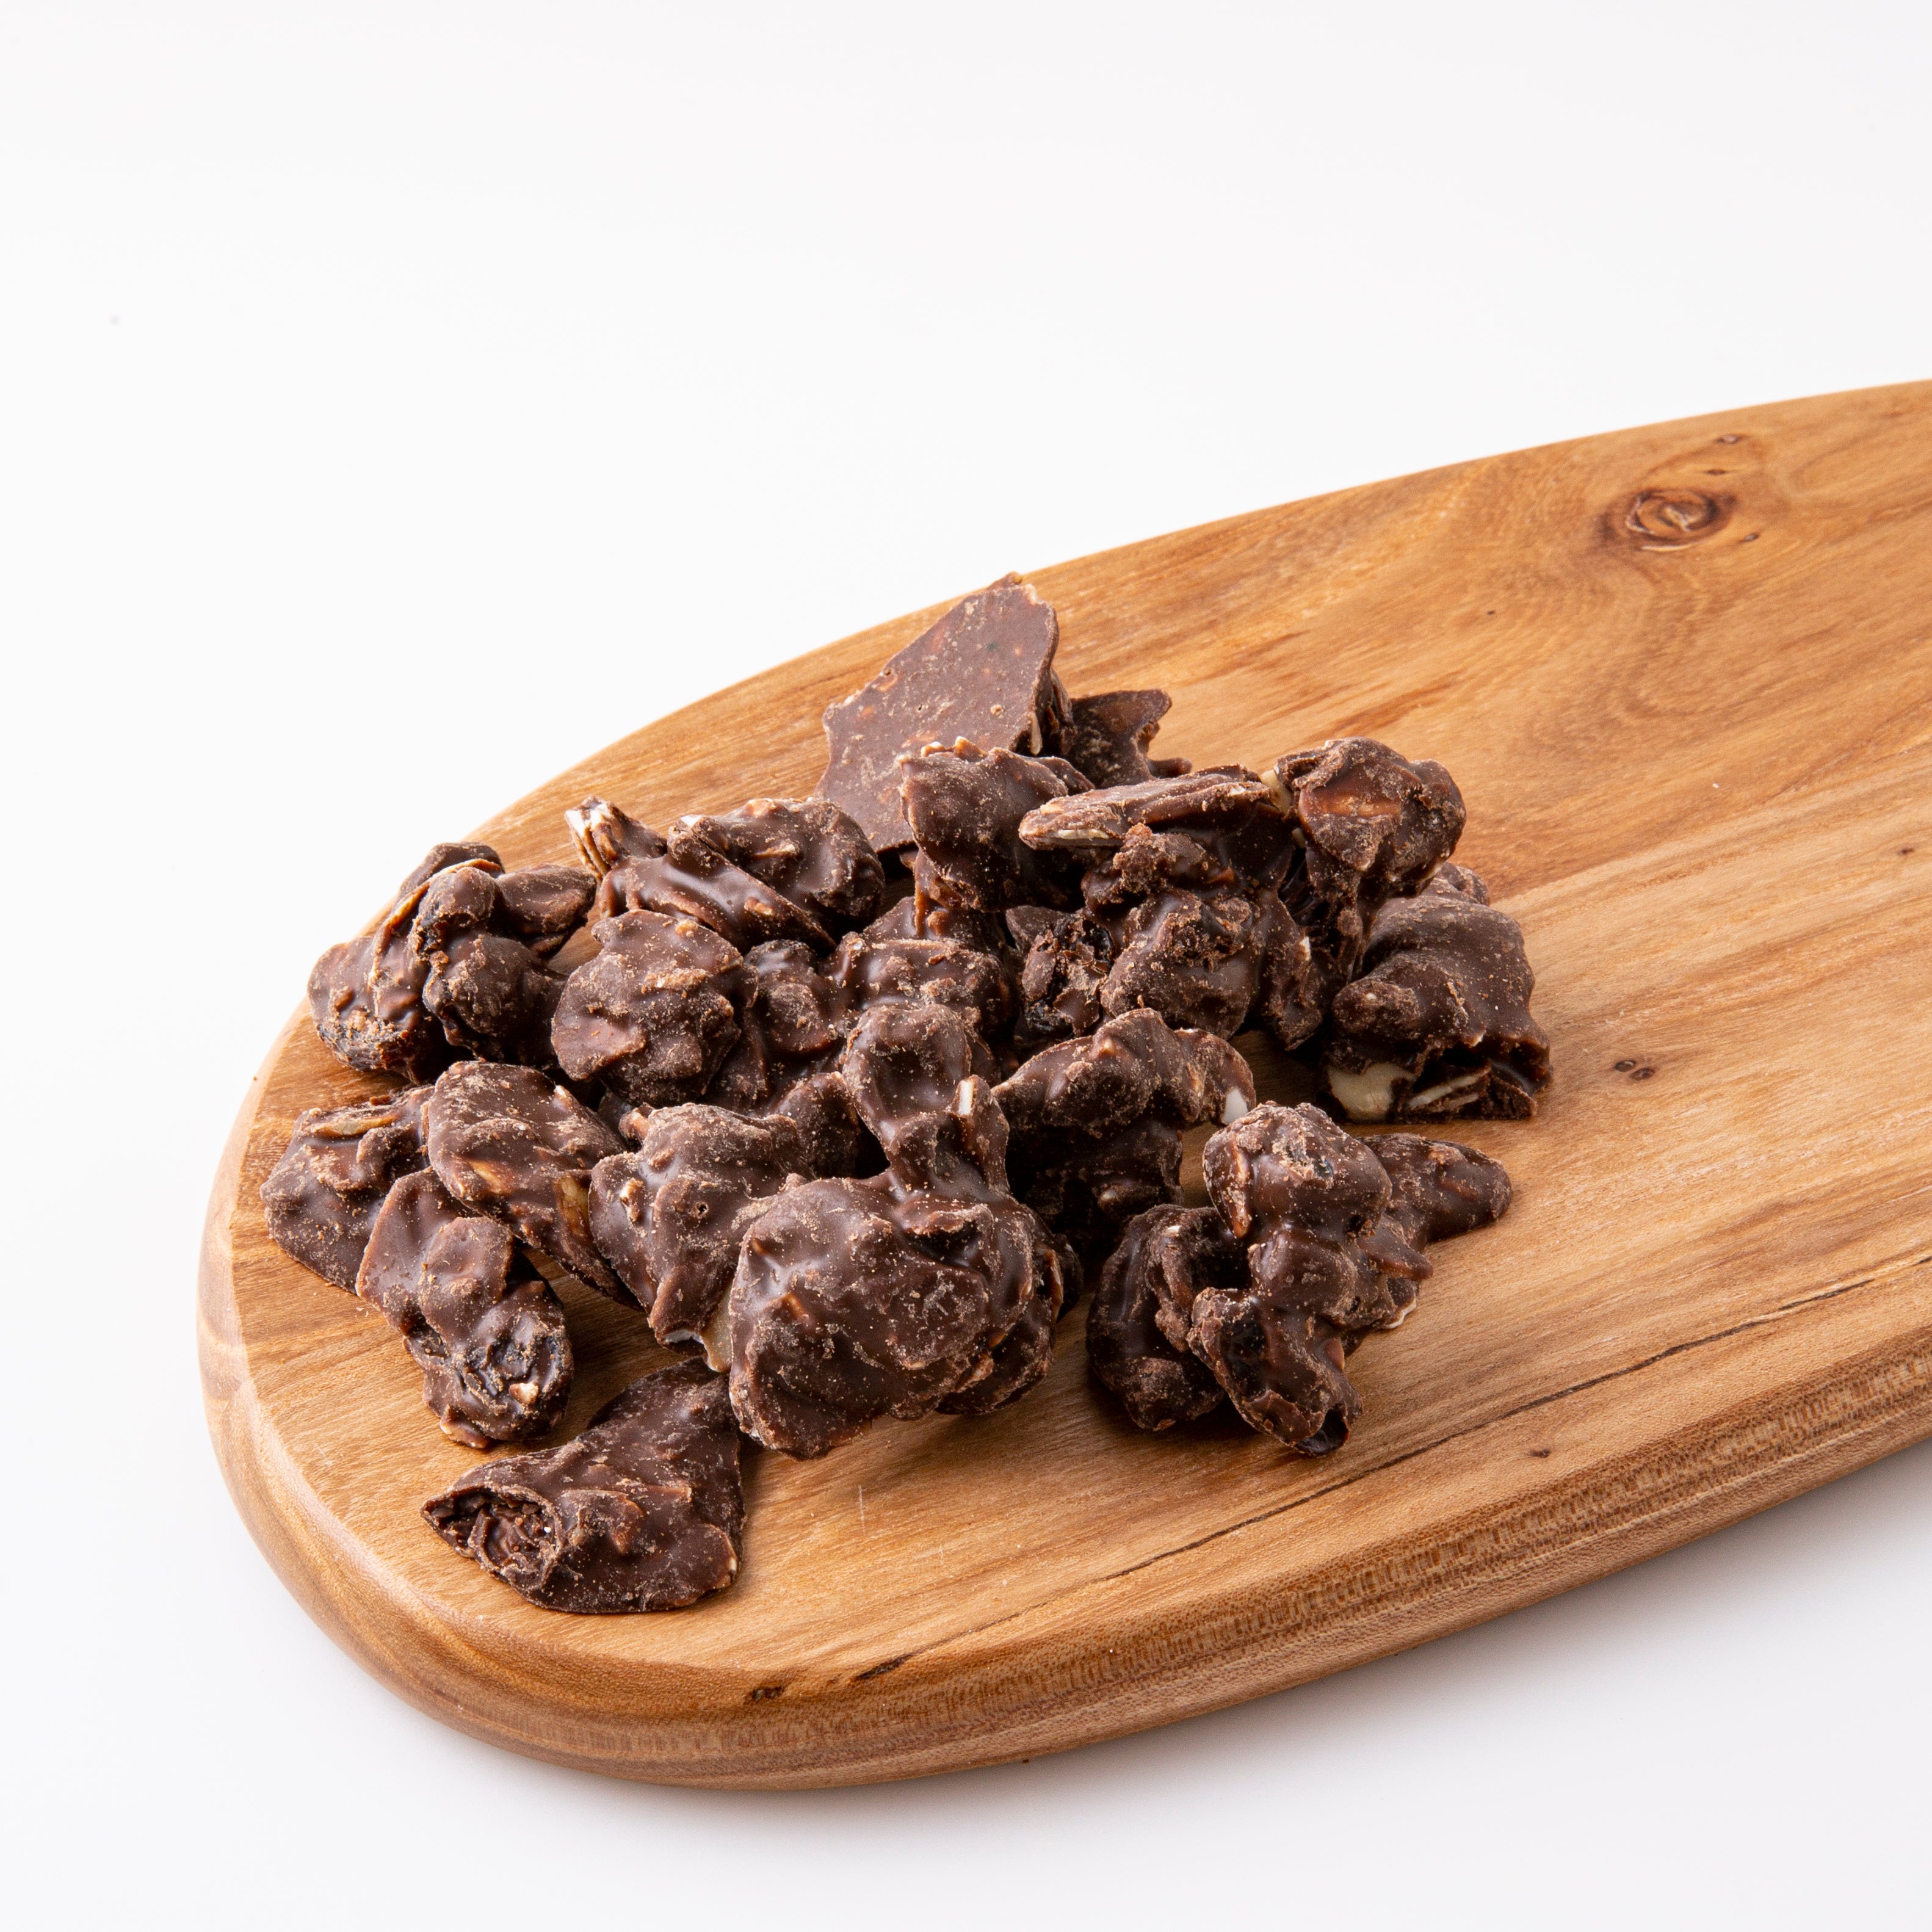 Almond and Raisin Carob Clusters on Wooden Serving Board - Naked Foods